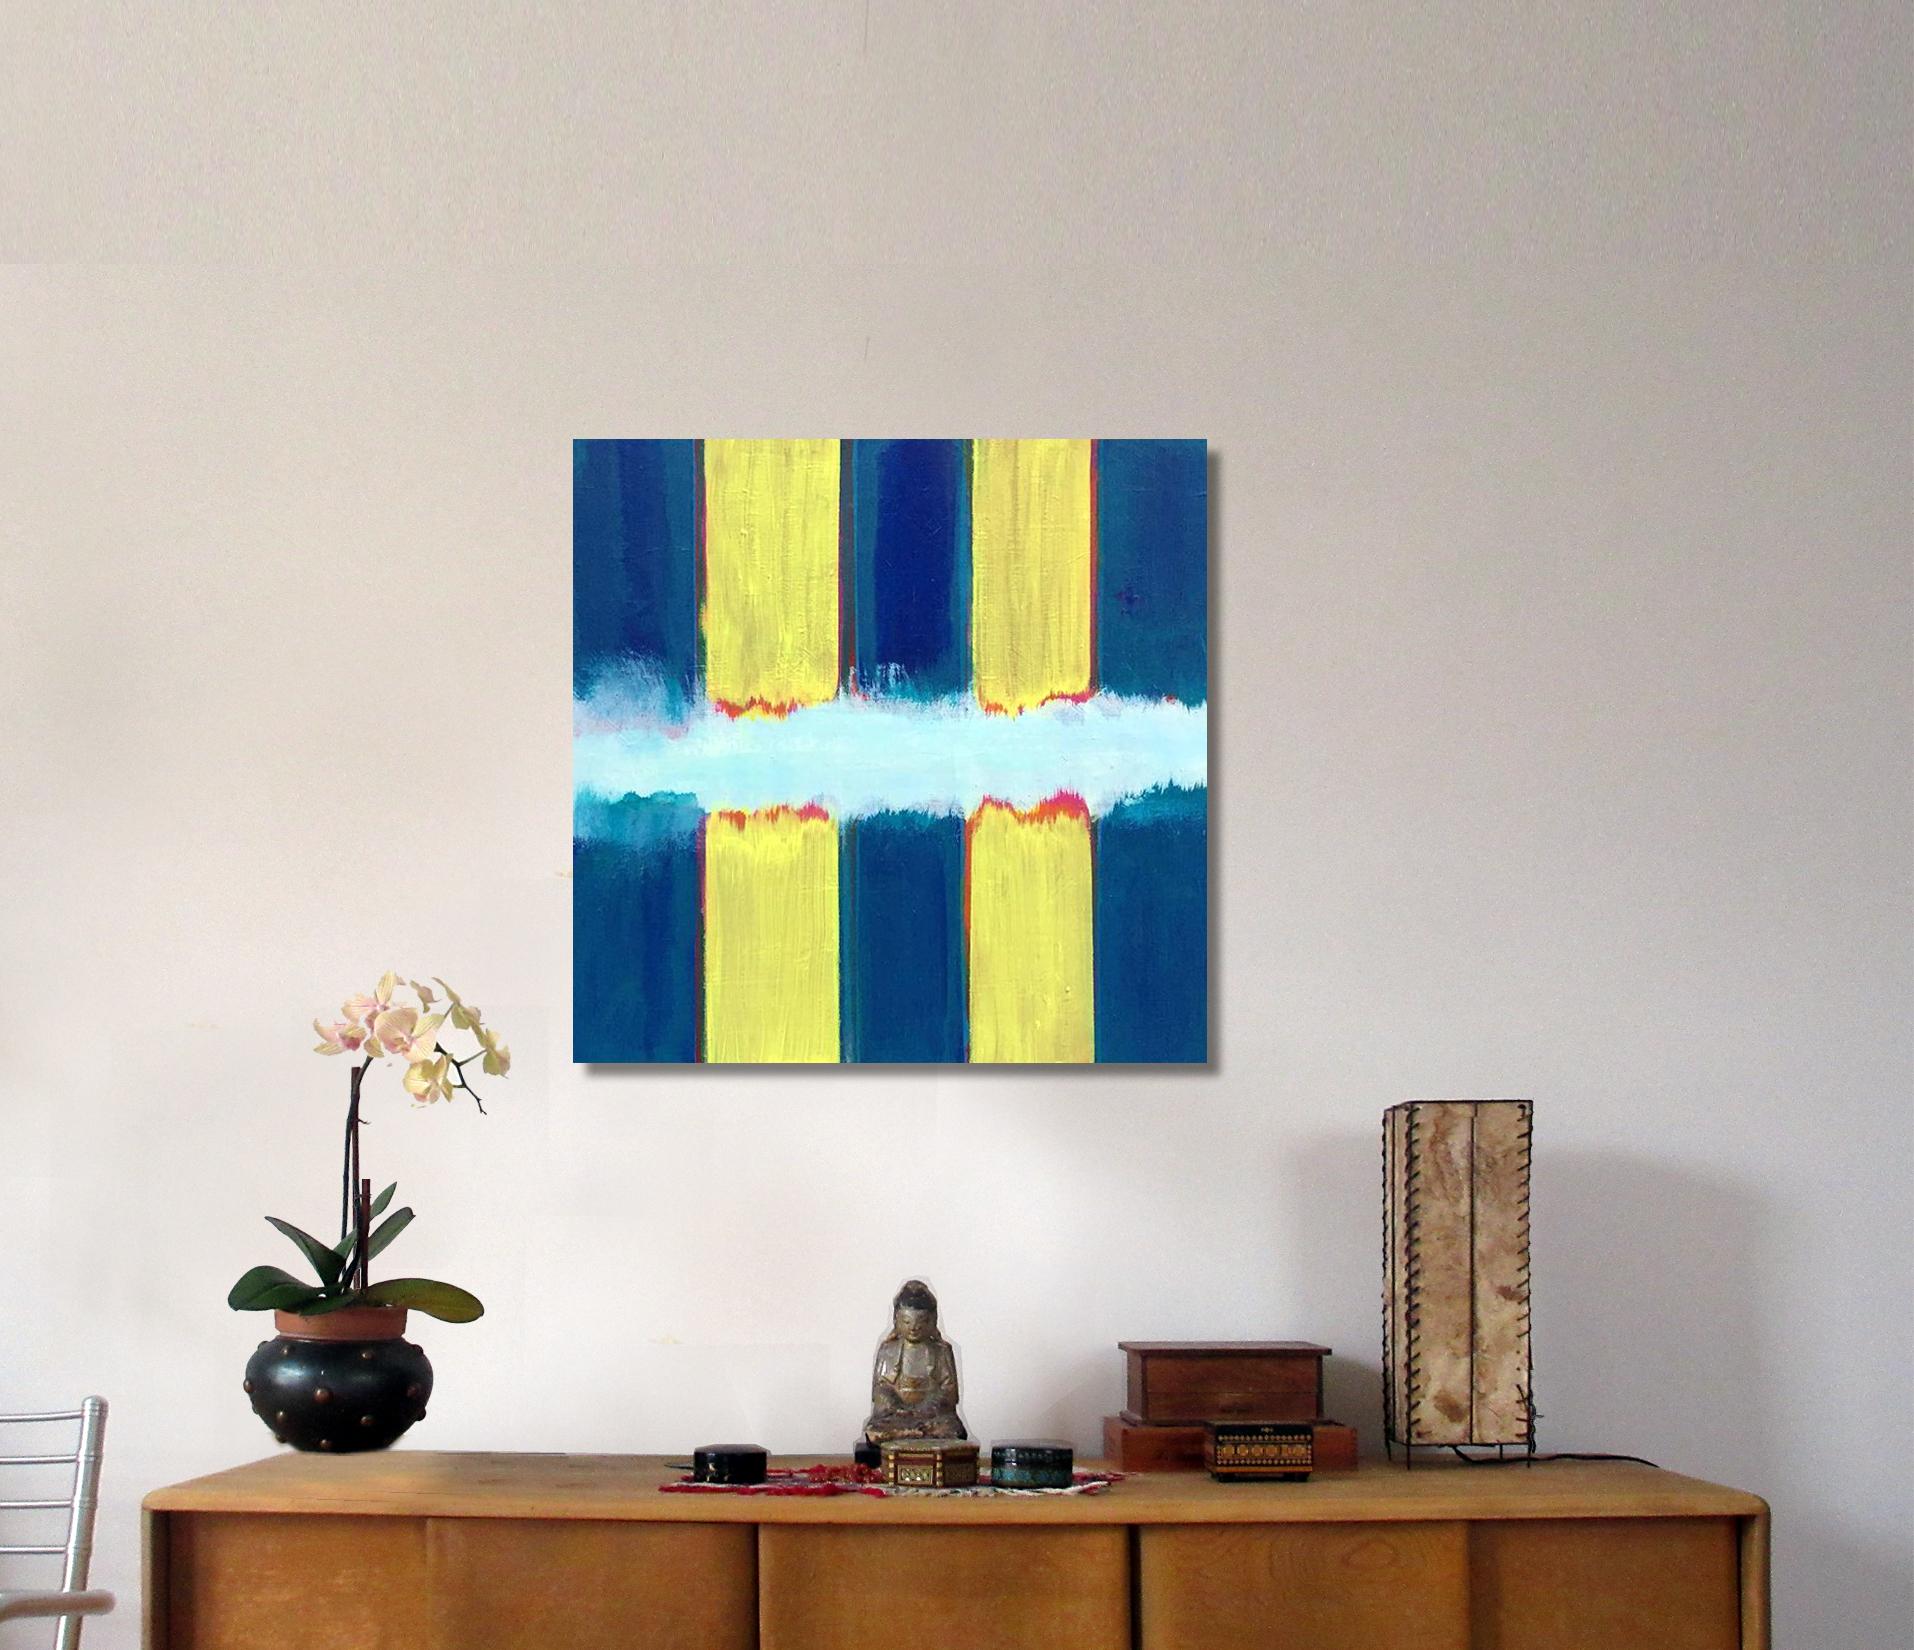 Cold Fusion#20, East Village, New York - Abstract Geometric Painting by Robert Petrick